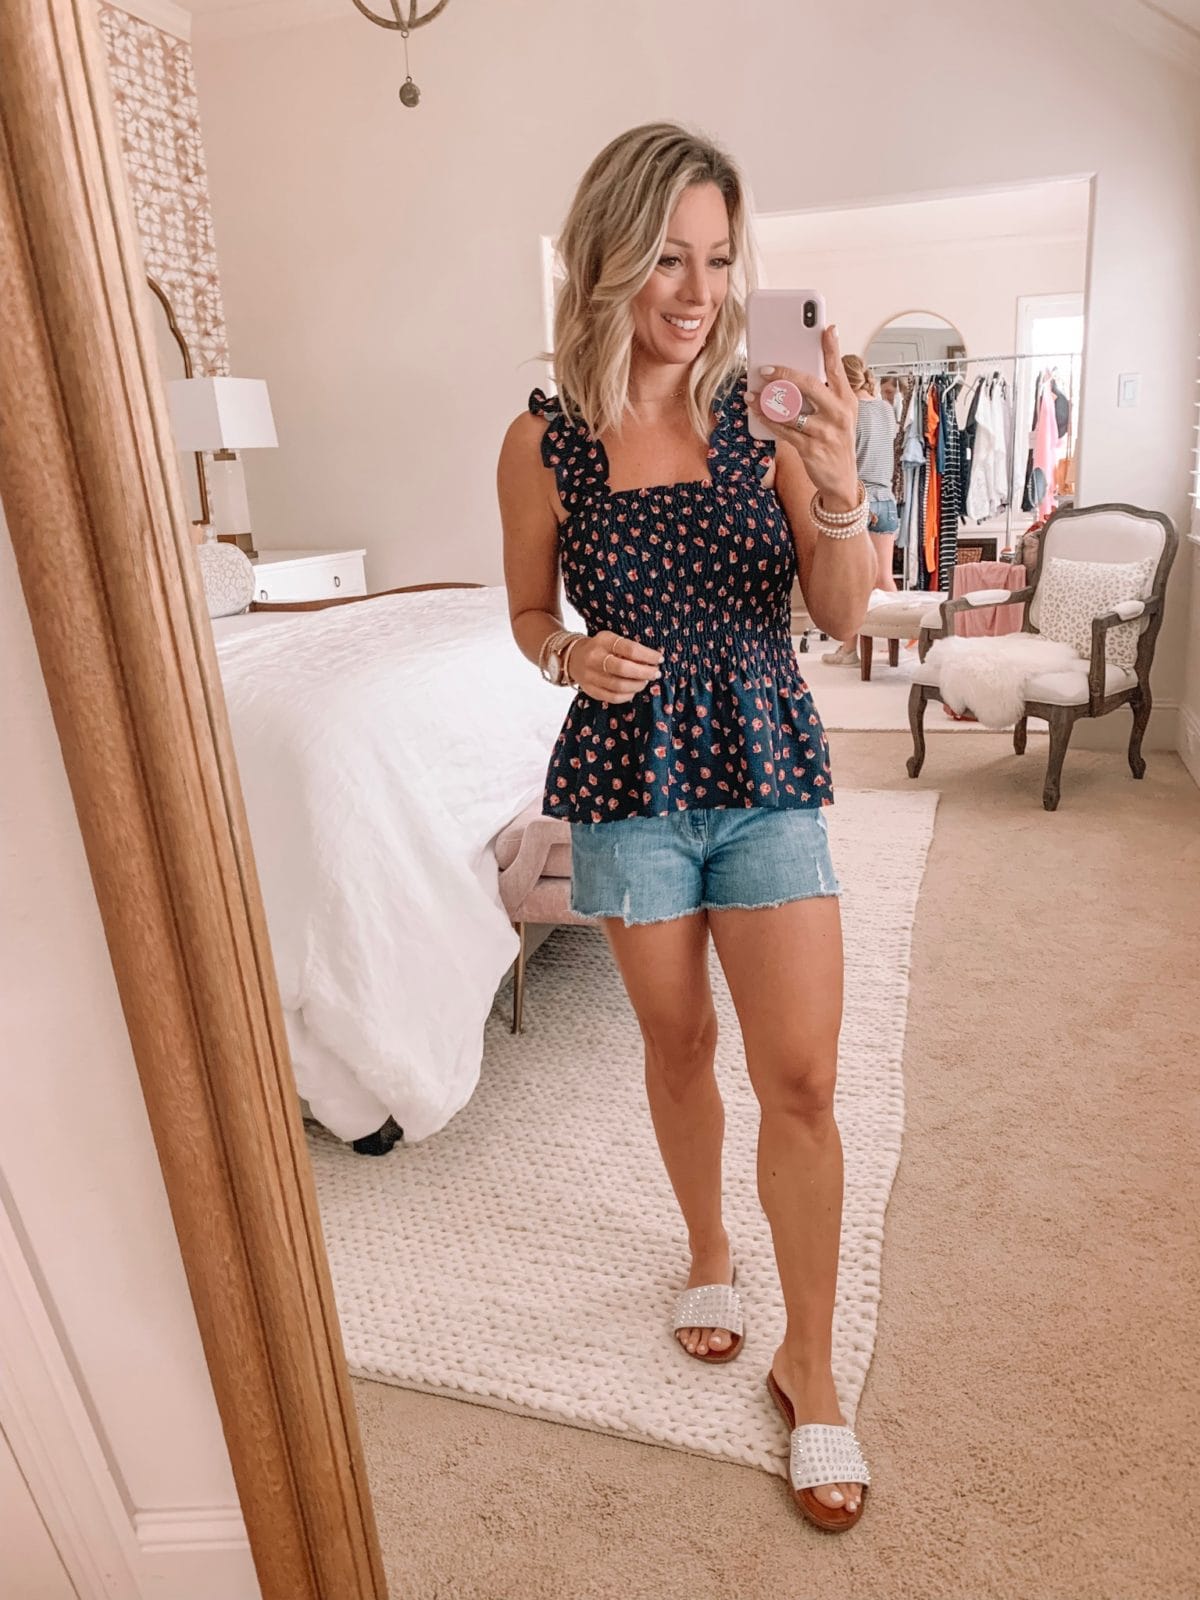 Amazon Fashion Haul - navy floral top and jean shorts